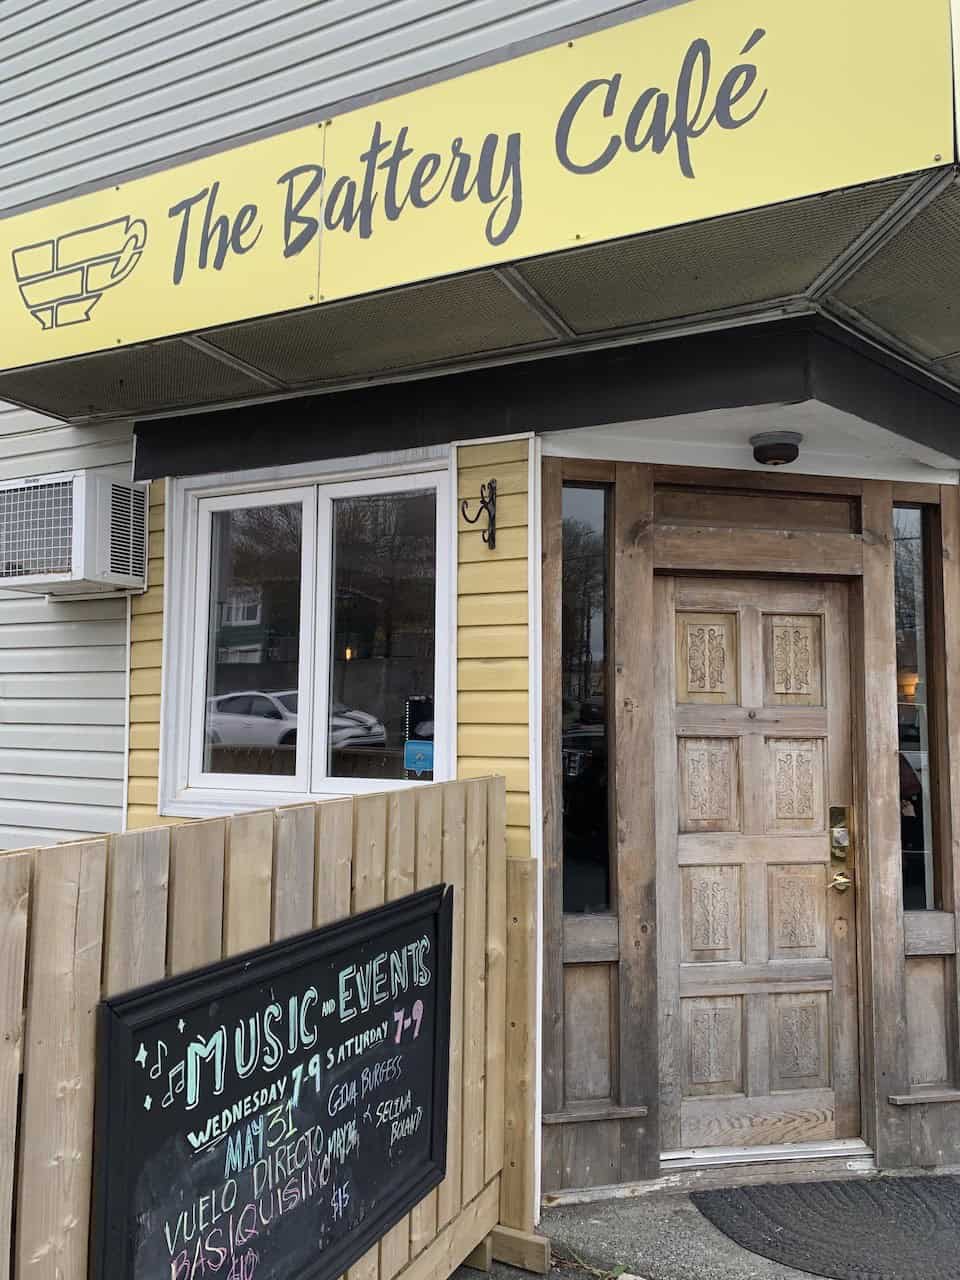 The Battery Café Entrance St John's Newfoundland - The entrance to The Battery Café in St. John's, Newfoundland has a chalkboard outside the door advertising upcoming local events and music.